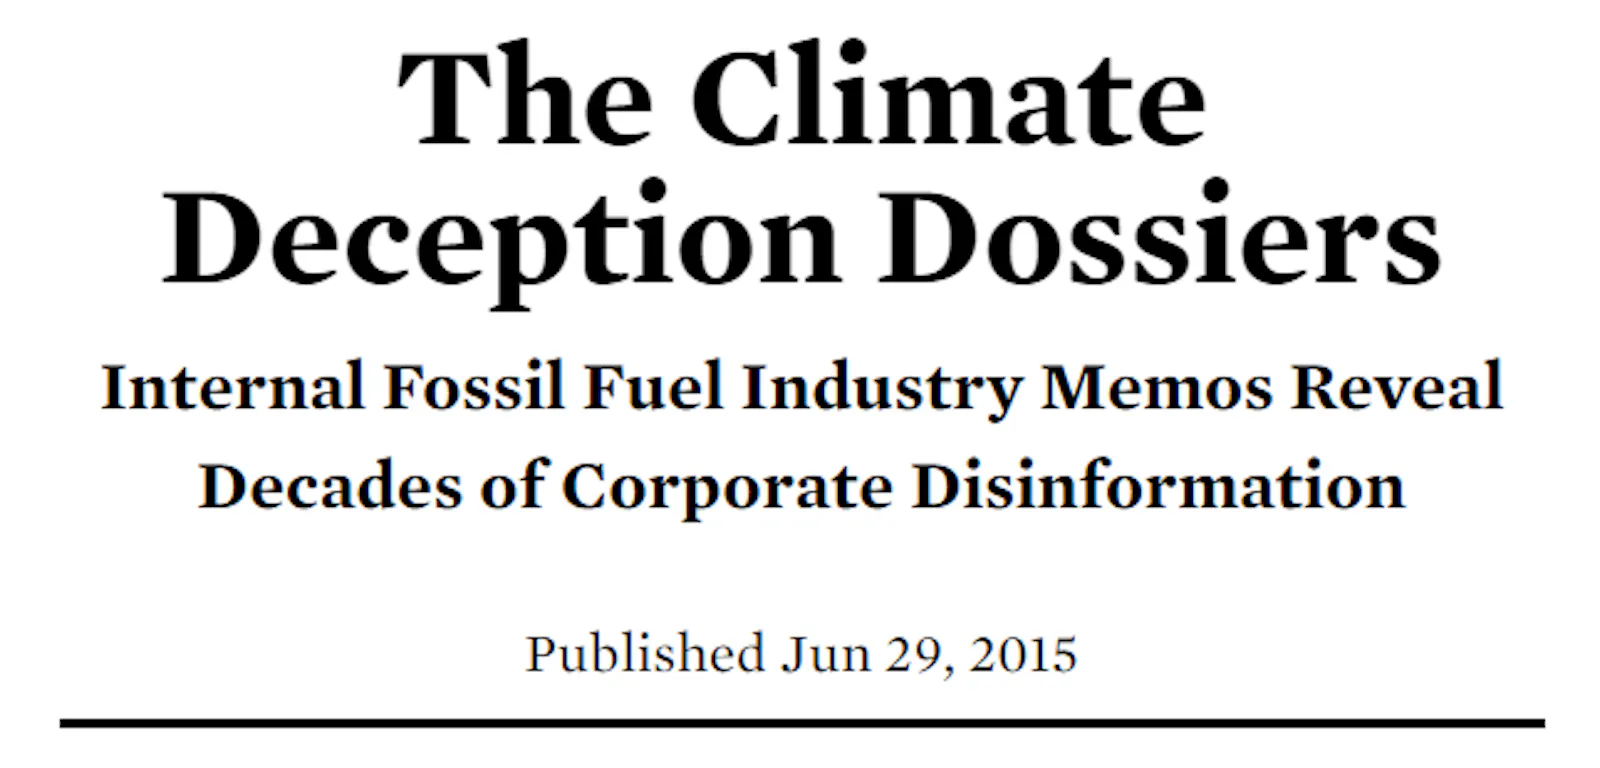 An image with the text "The Climate deception Dossiers. Internal Fossil Fuel Industry Memos Reveal Decades of Corporate Disinformation (that means that they value money more than honesty)